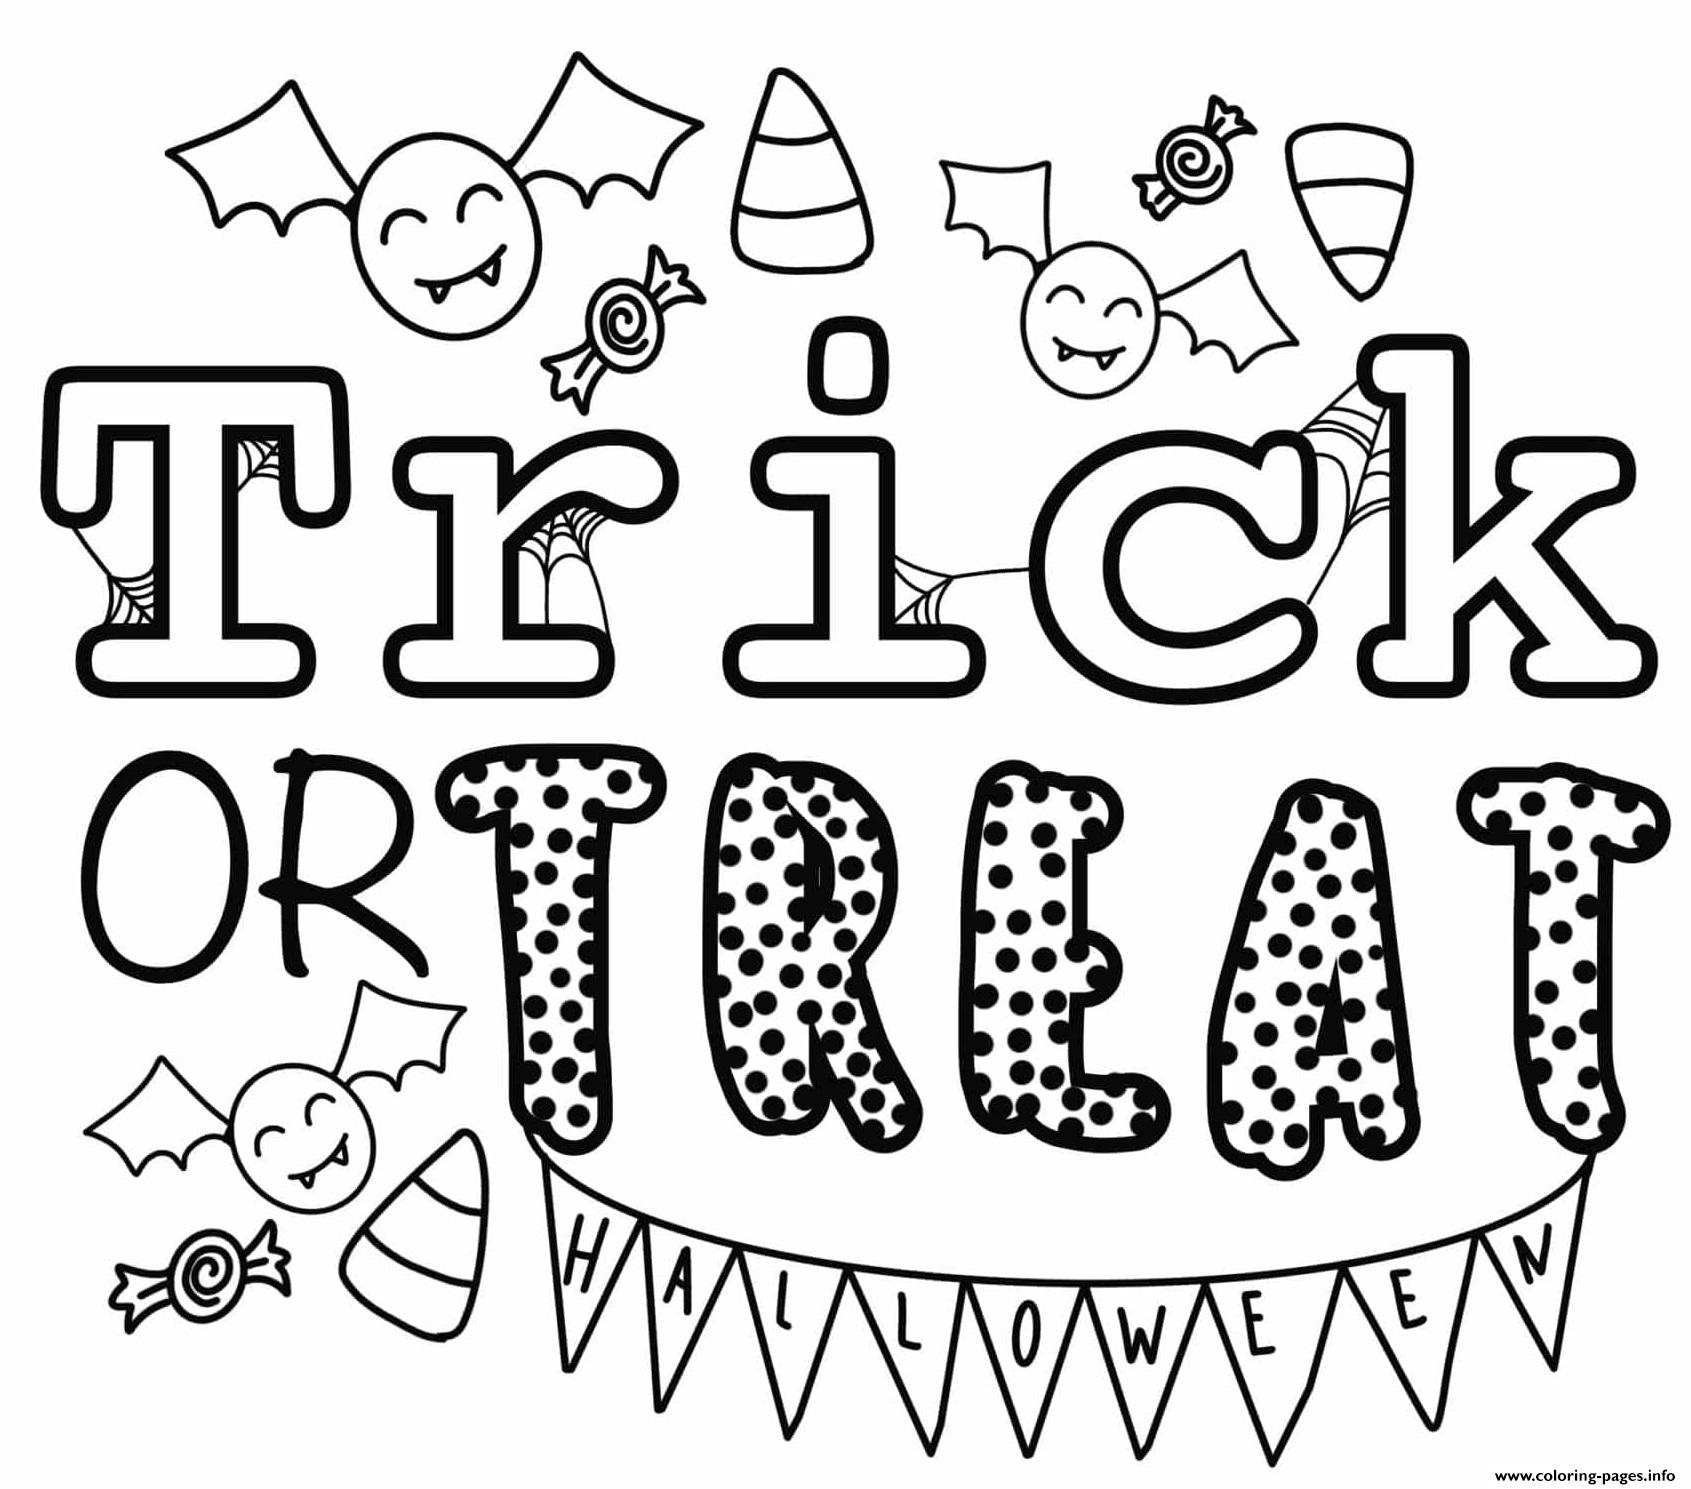 Trick Or Treat Halloween By Heather Hinson coloring